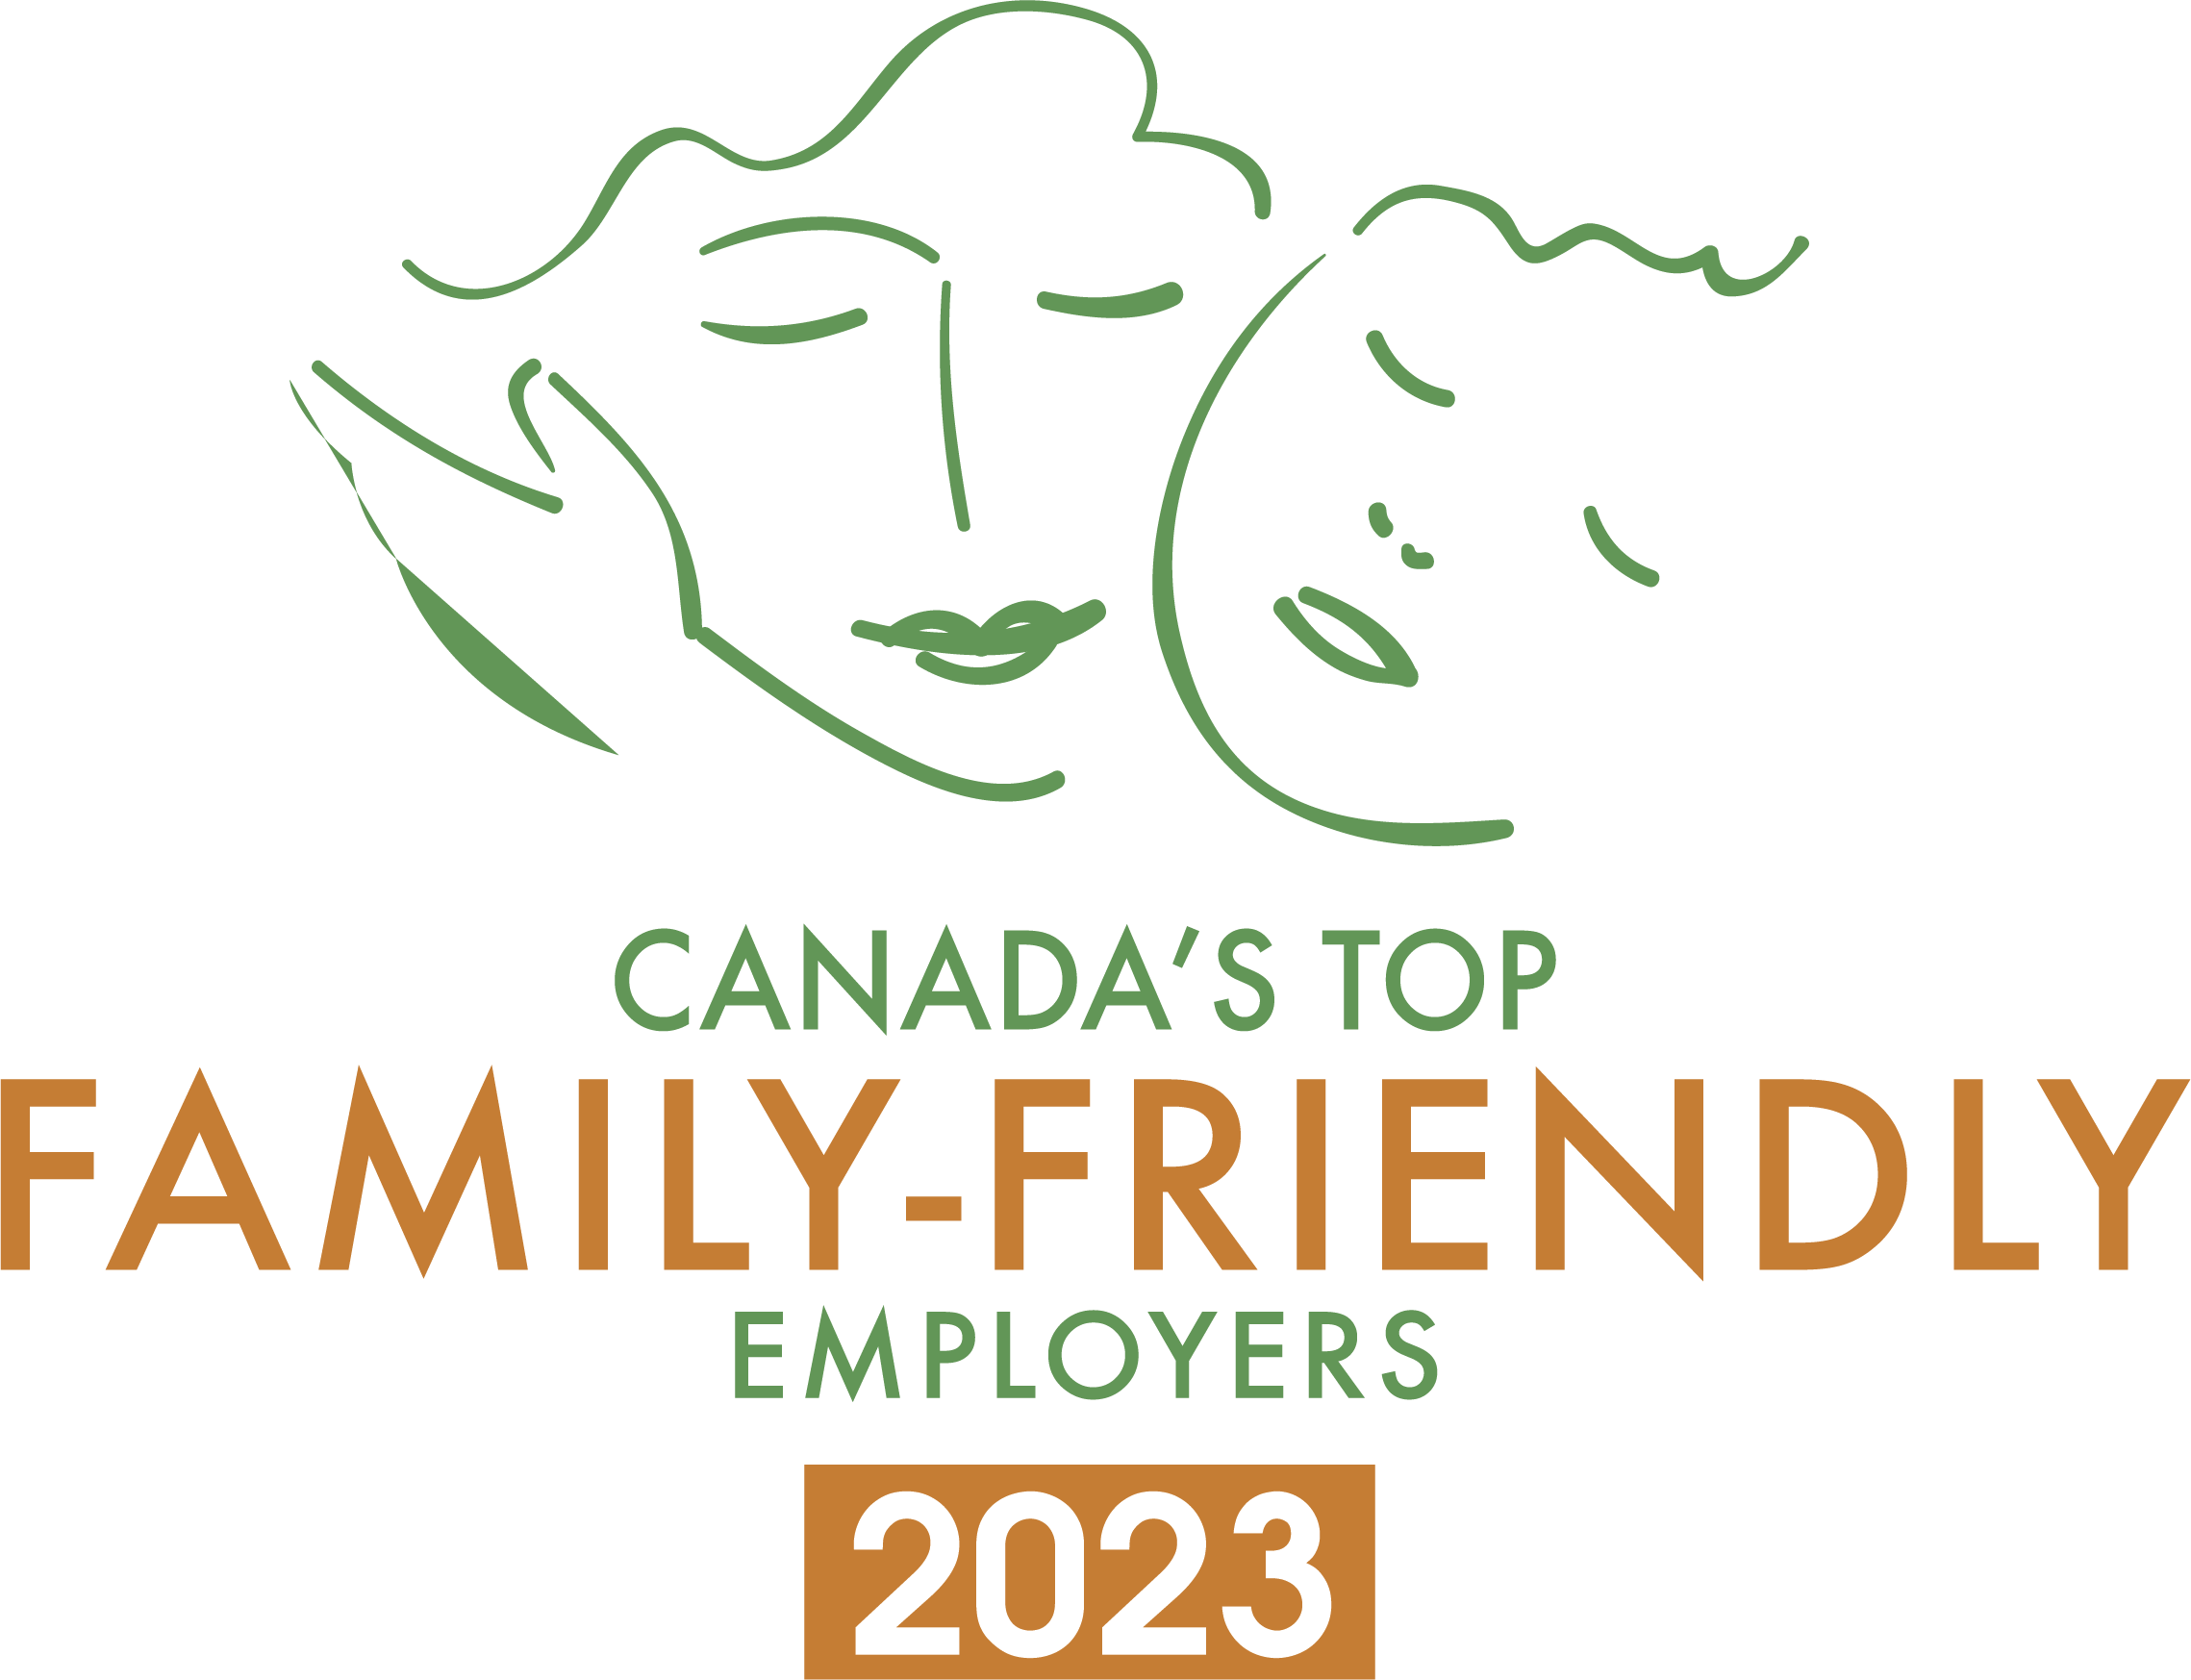 Canada's Top Family-Friendly Employees